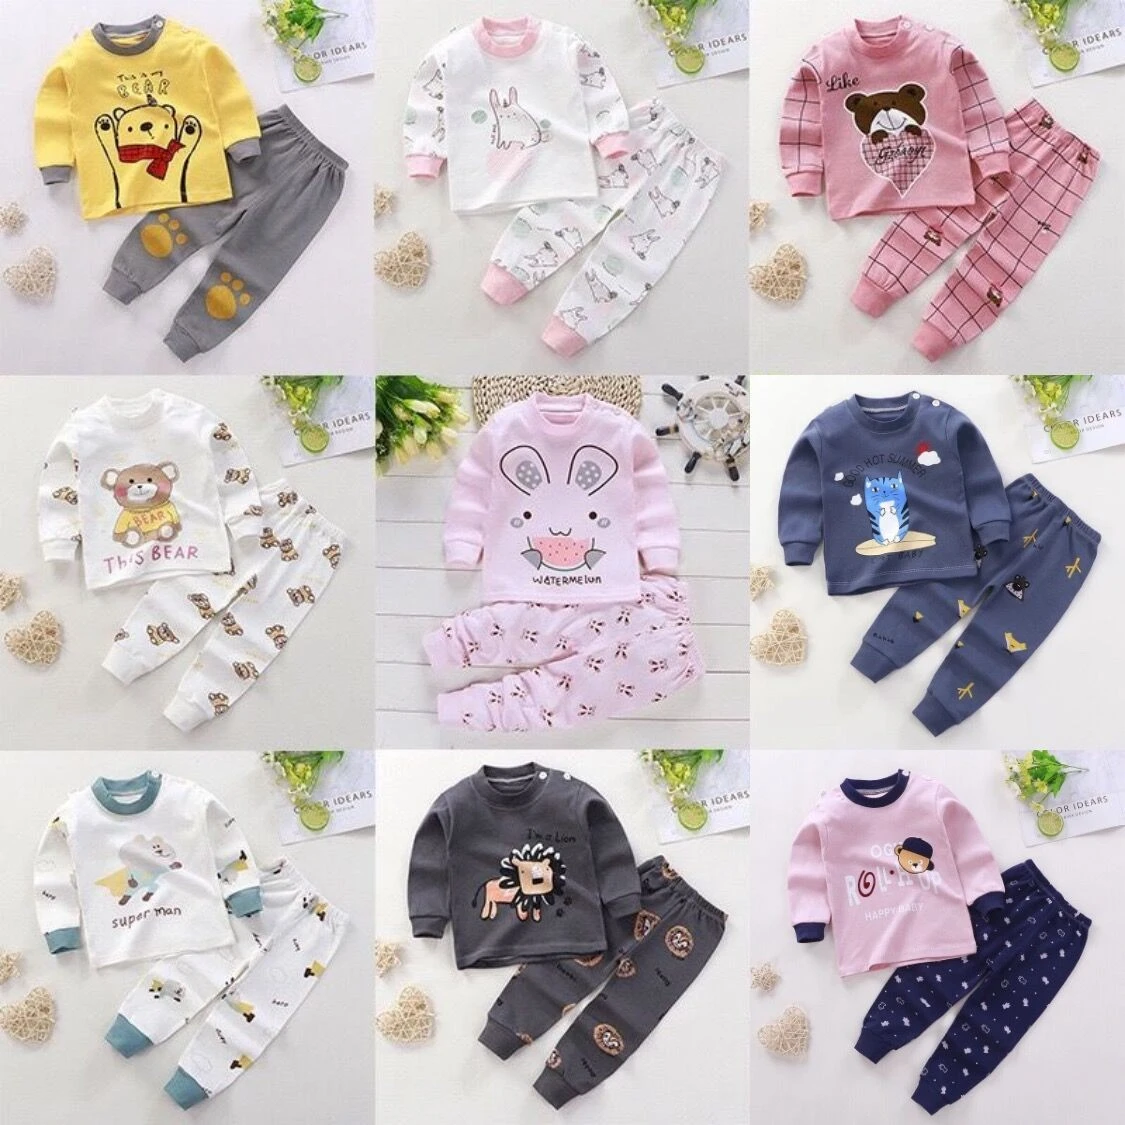 Baby Clothing Set for boy 2021 Autumn New Baby Girls Clothing Sets Cotton Newborn Baby Boys Long Sleeve Bottom Shirt + Pants Suit 0-4 Year Baby Clothes Baby Clothing Set near me